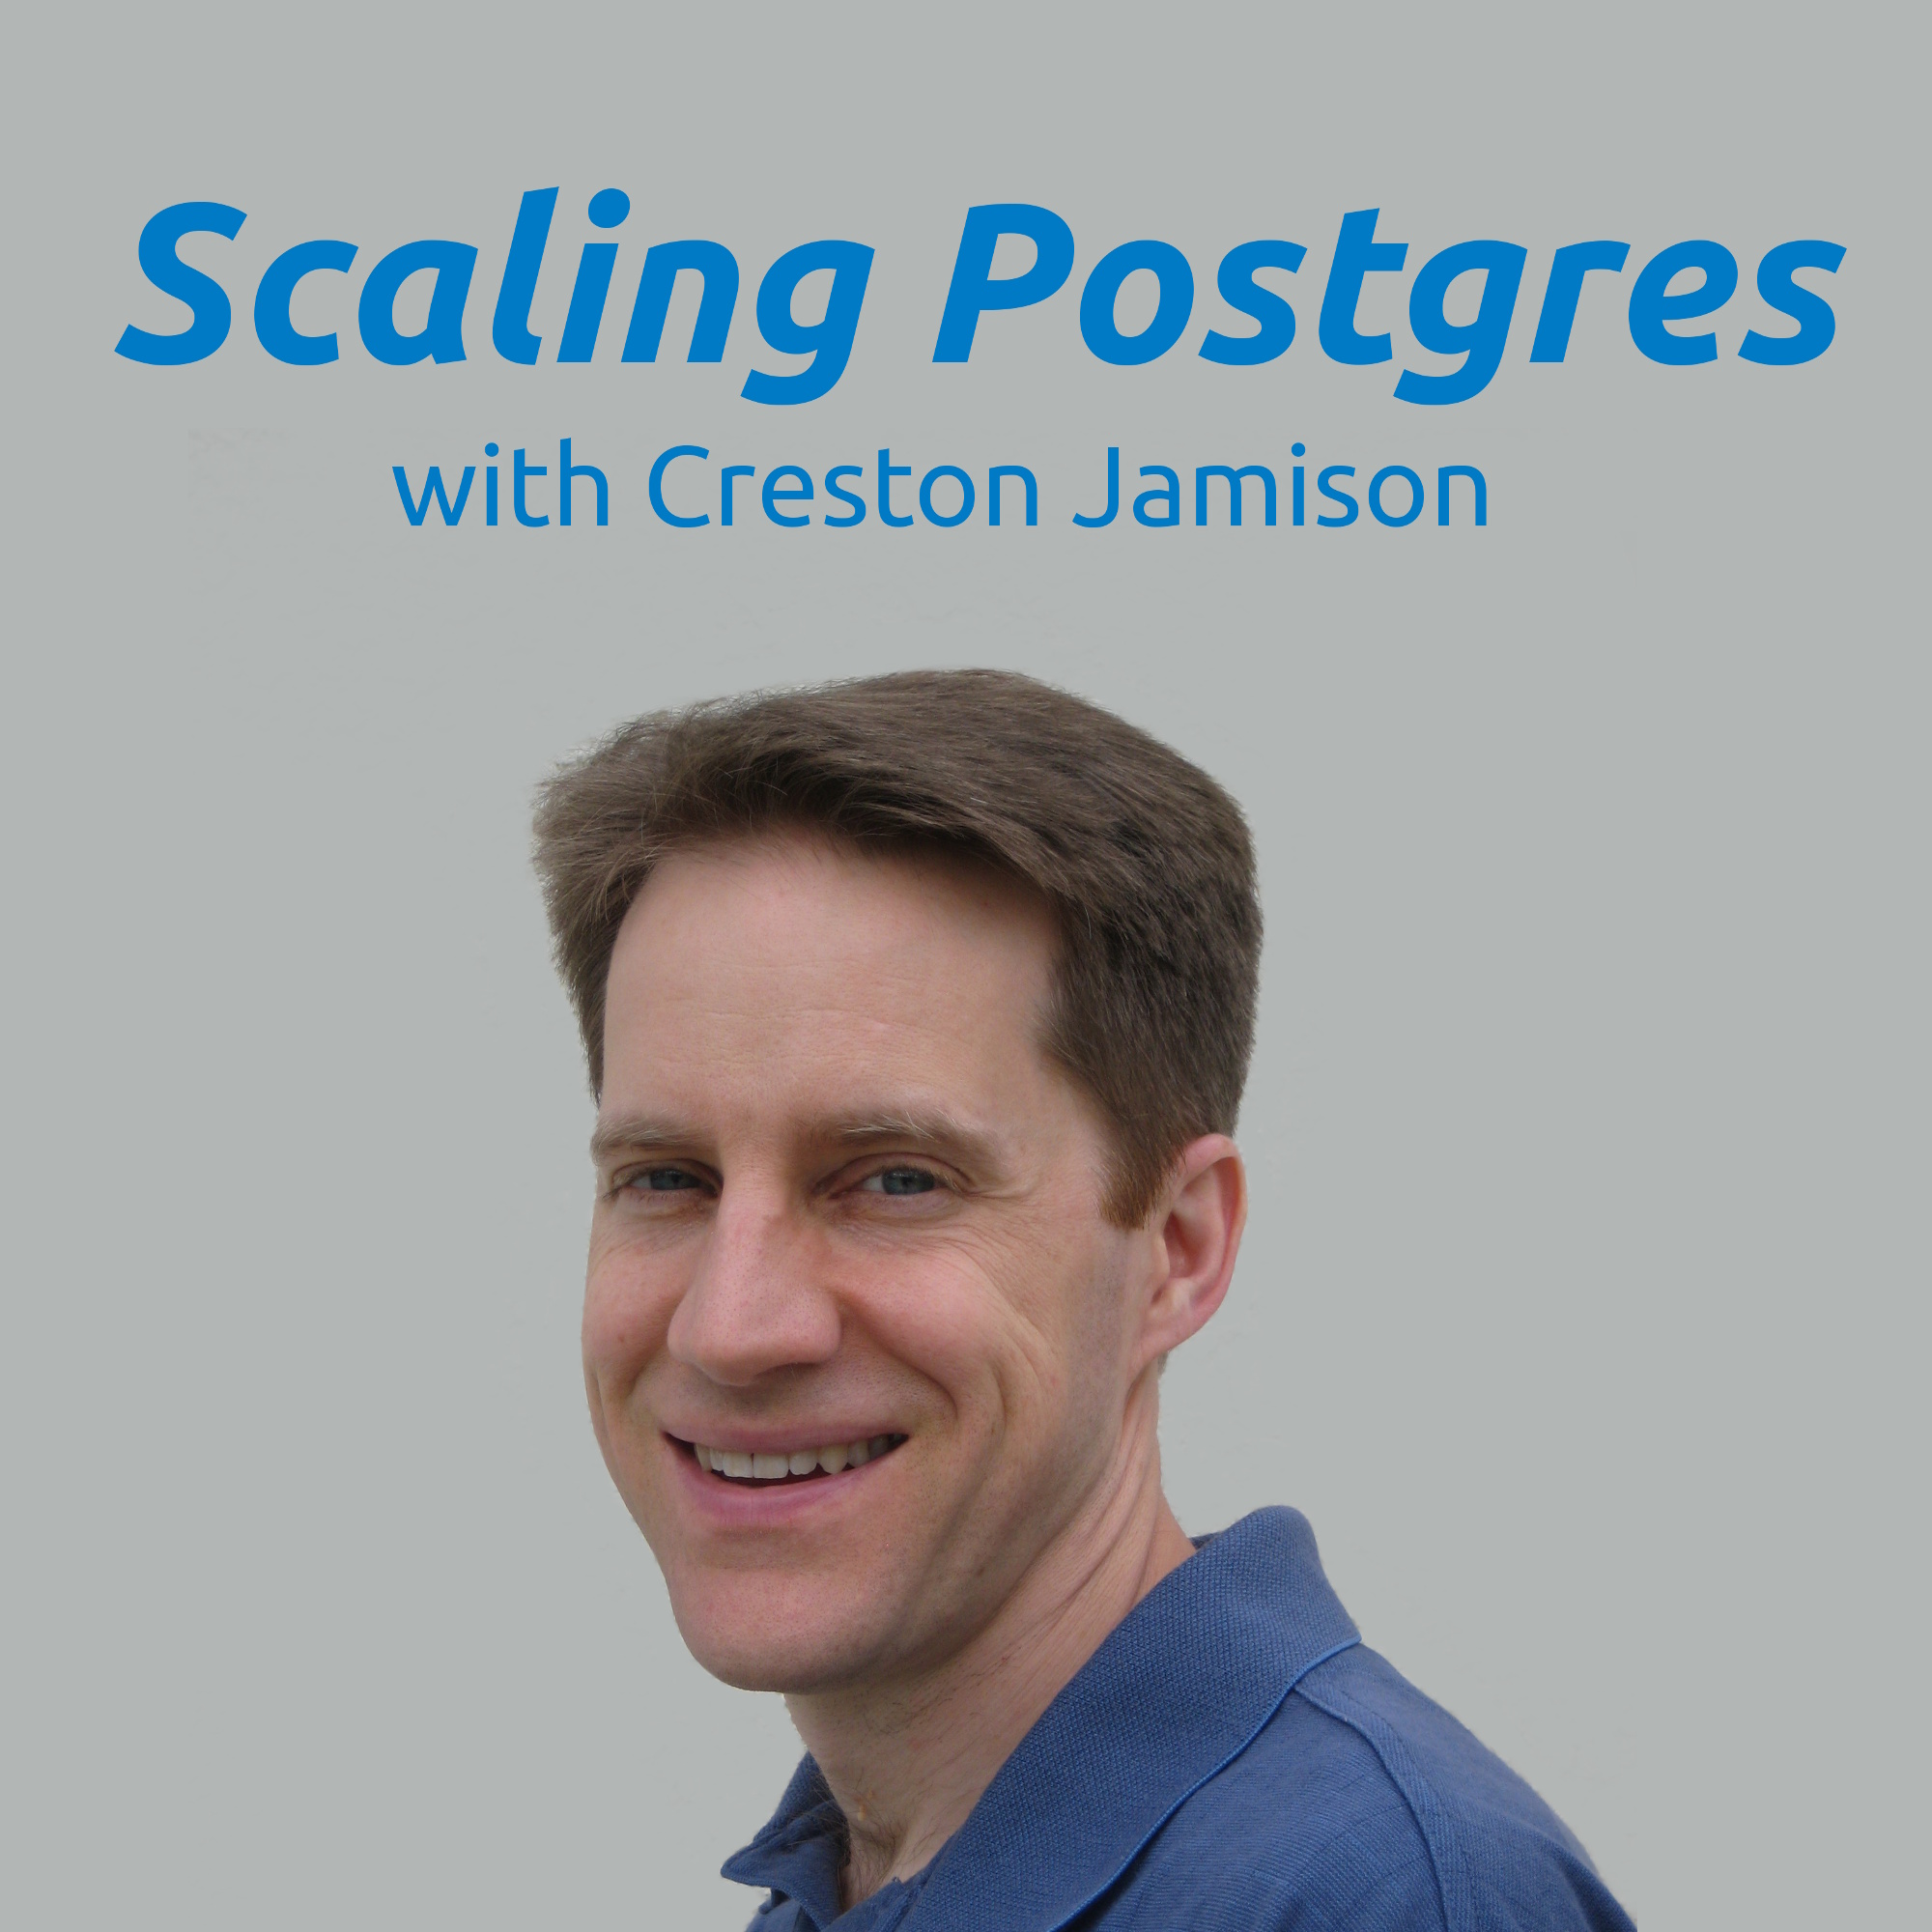 Checking Vacuum, Fast Distinct Count, Group By Speed Up, Health Check | Scaling Postgres 57